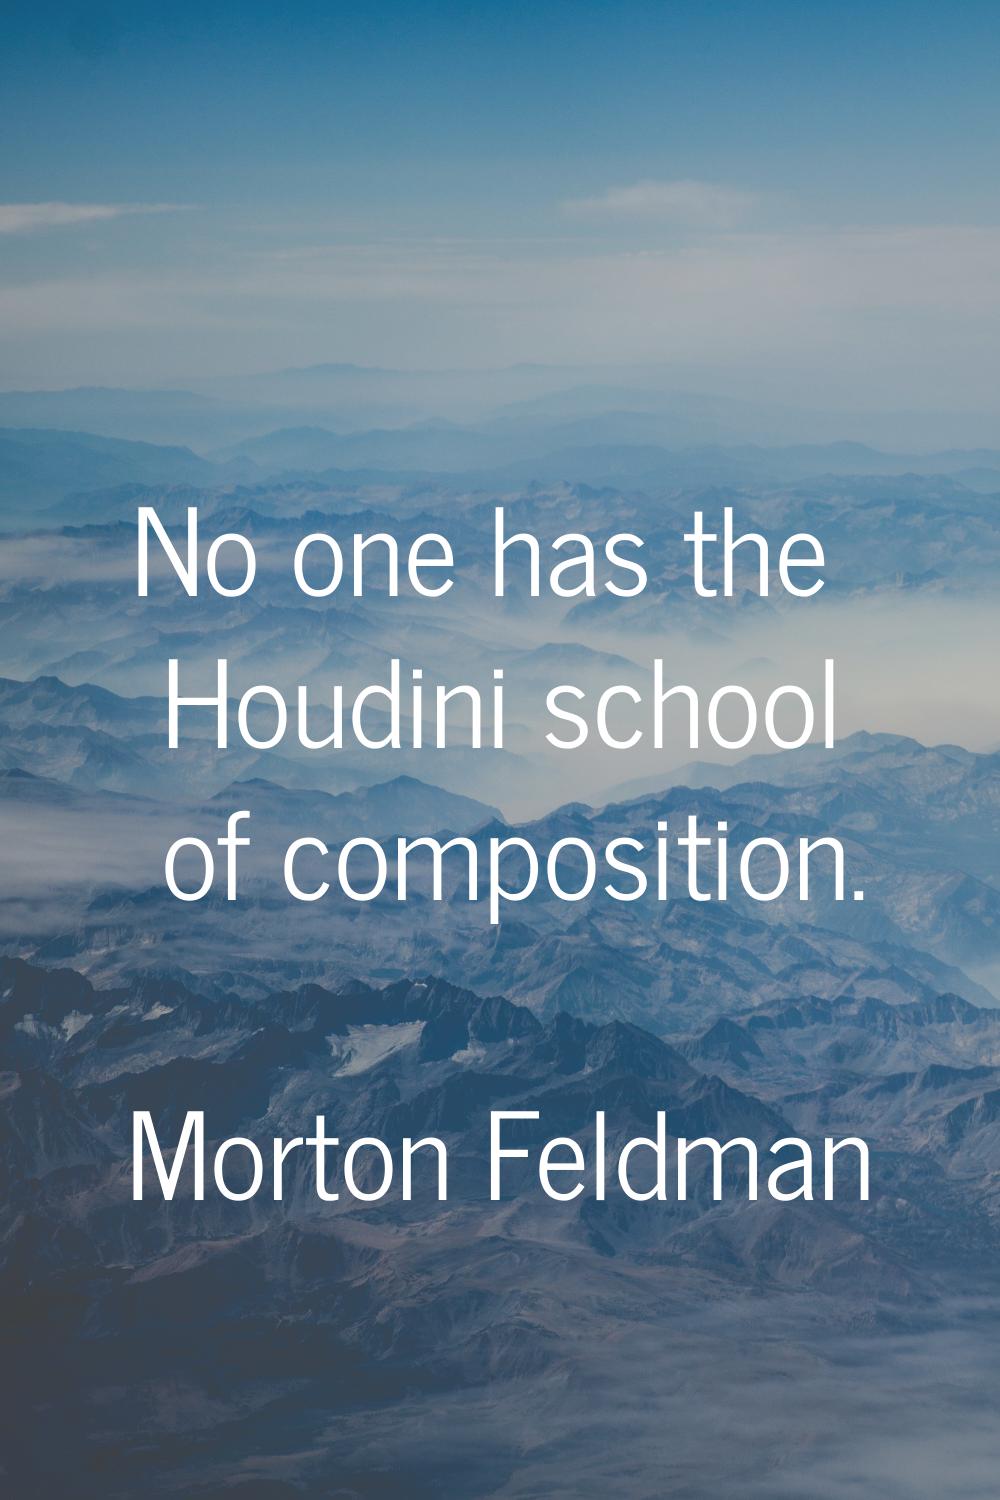 No one has the Houdini school of composition.